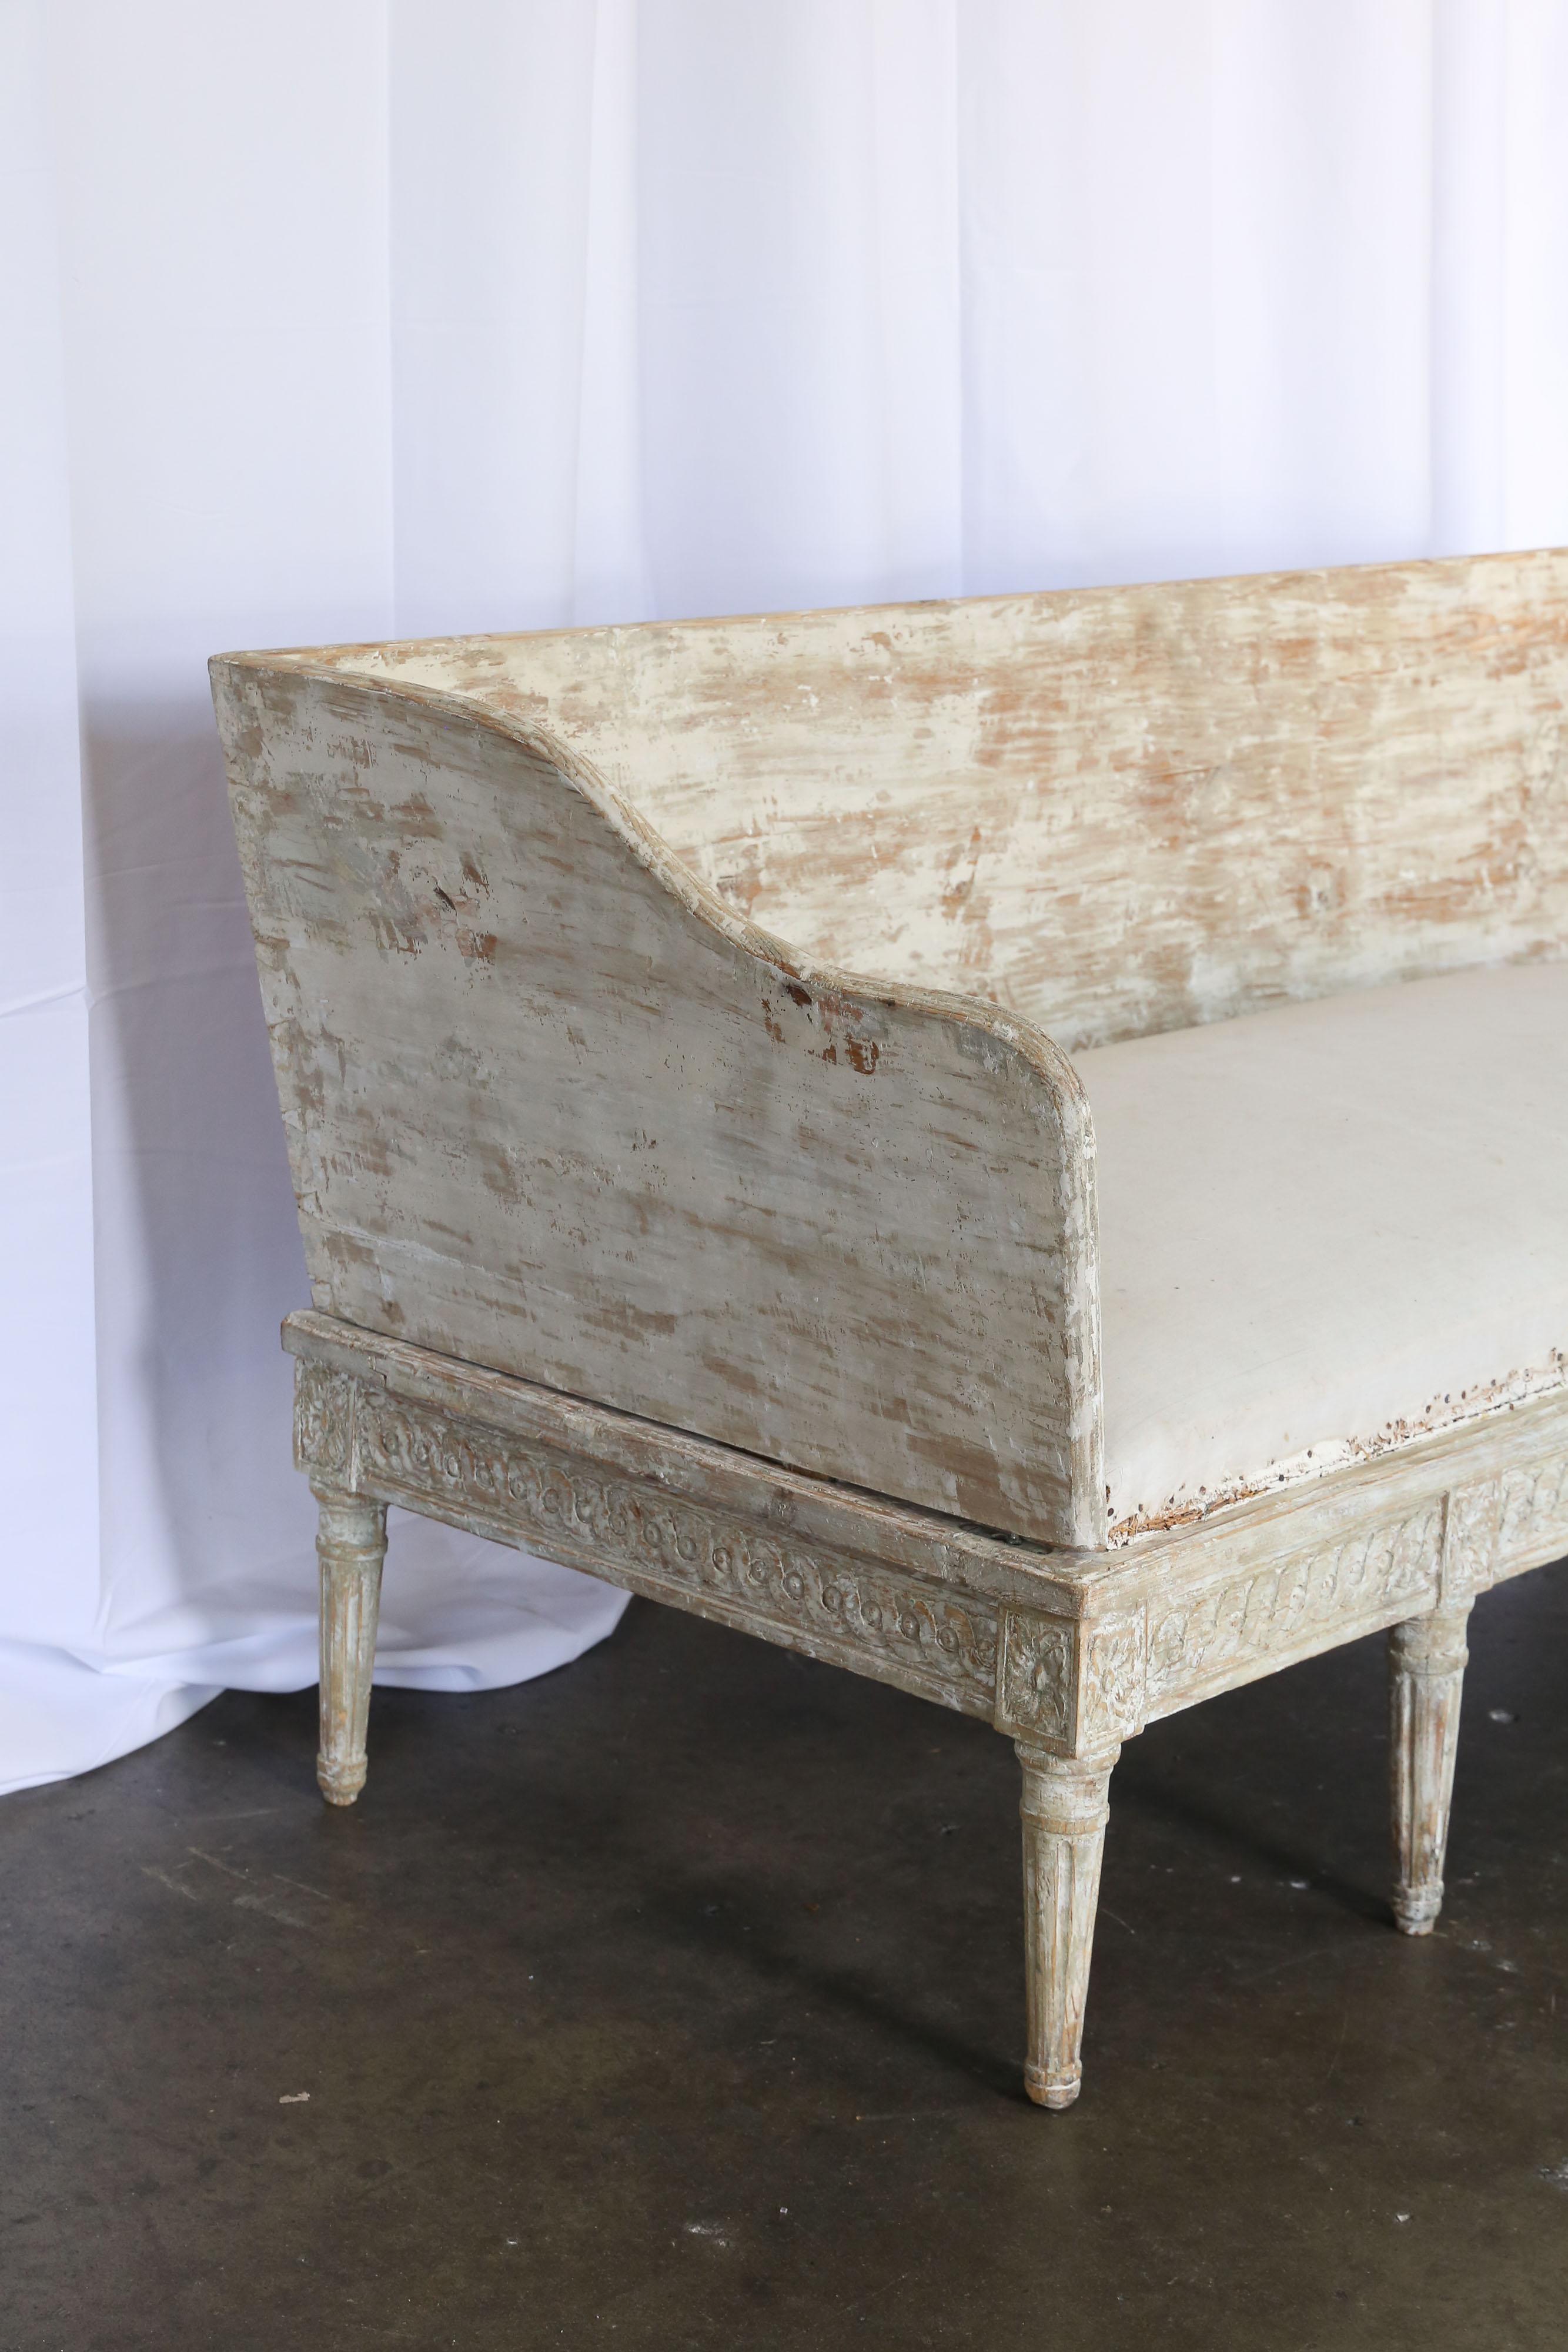 18th century Gustavian sofa with original paint dry scraped as in the European fashion. Round tapered legs and detailed carving around the sides and front of the sofa. At the top of each leg is a rectangular carved block medallion.